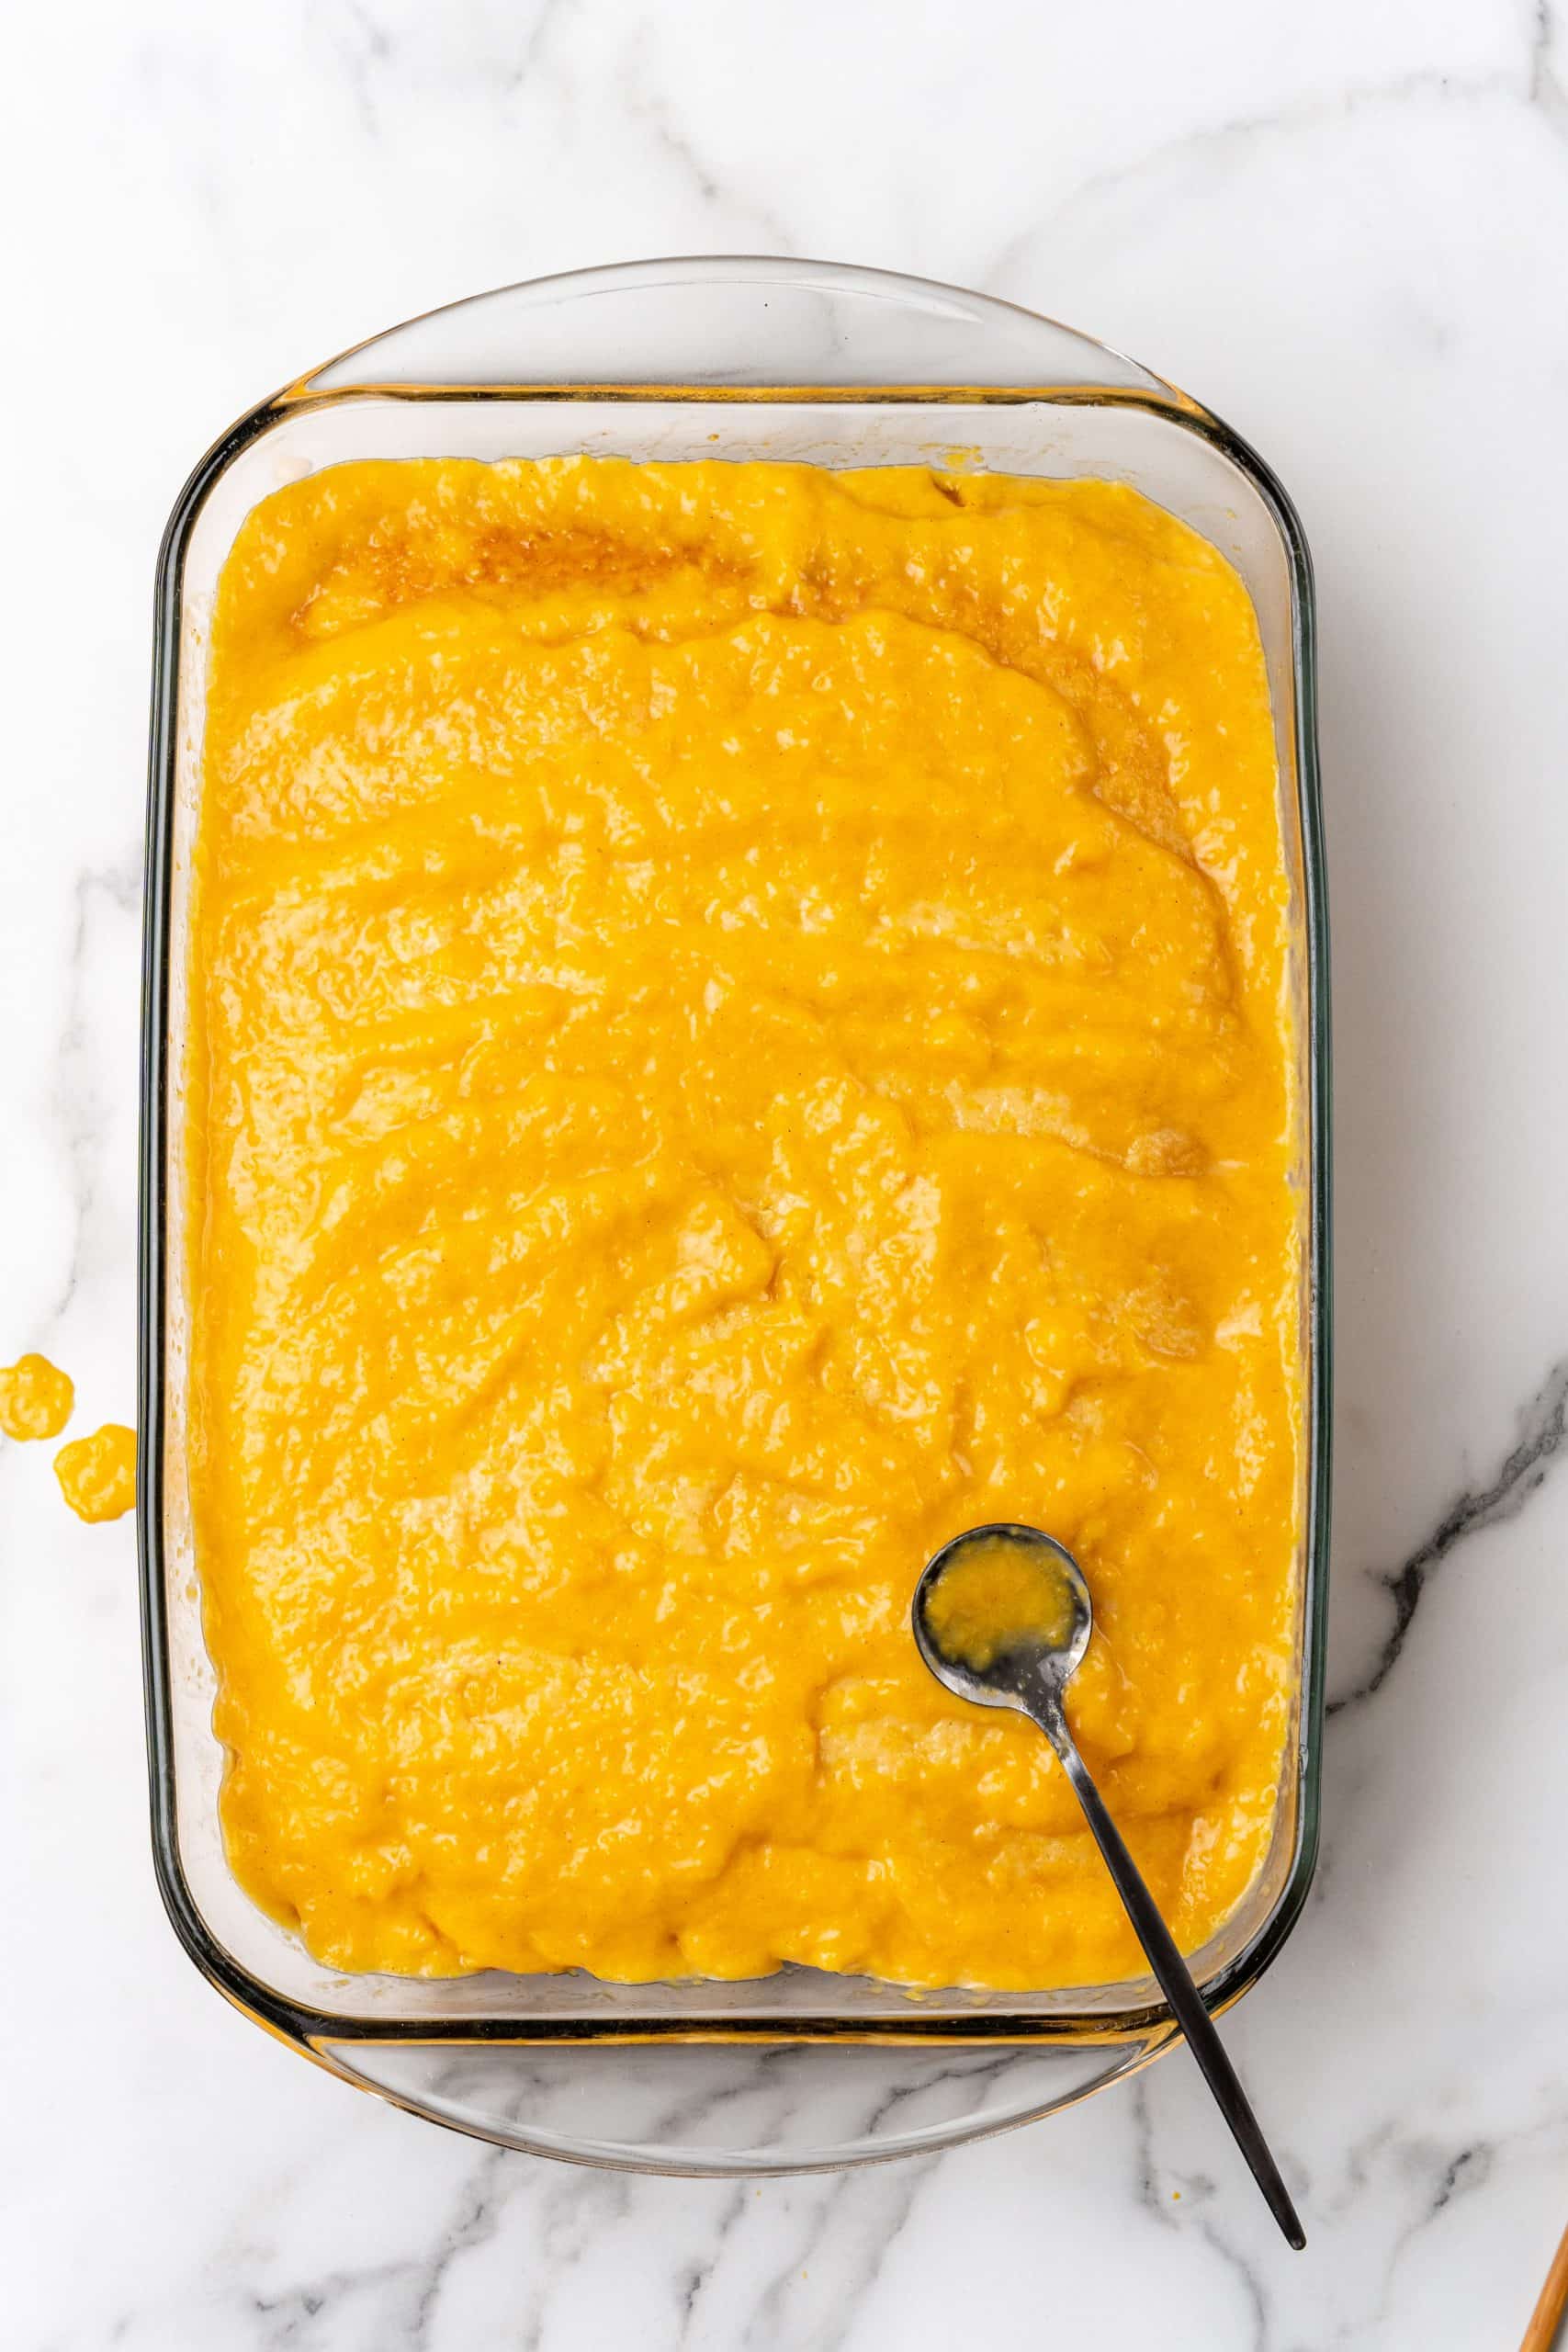 peach puree spread over a baked cake in a glass baking dish